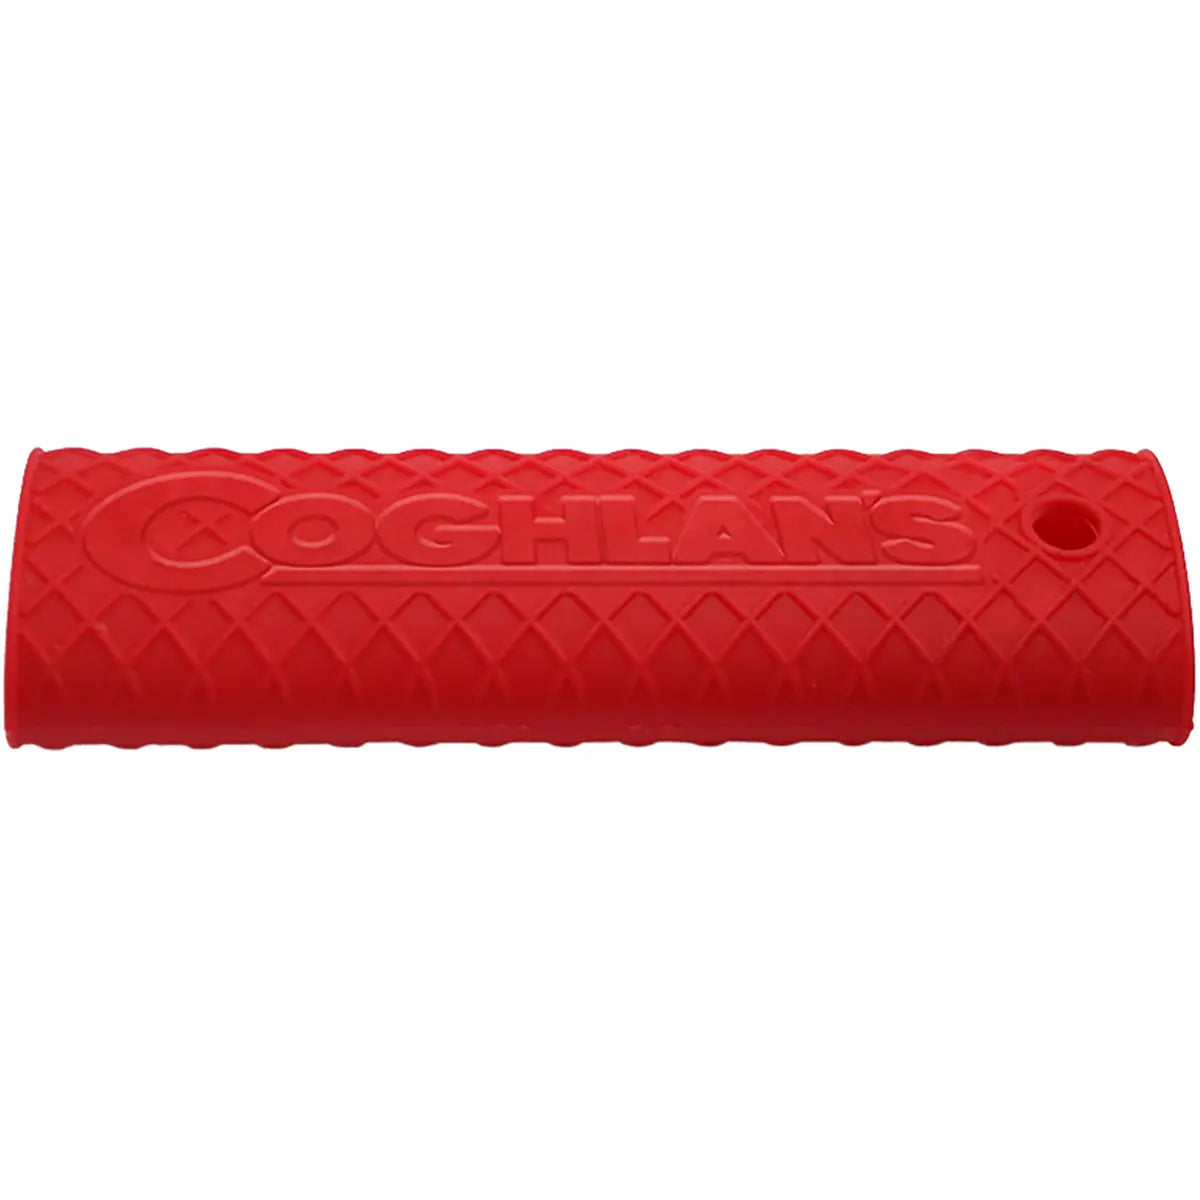 Coghlan's Silicone Handle Grip - Red Coghlan's